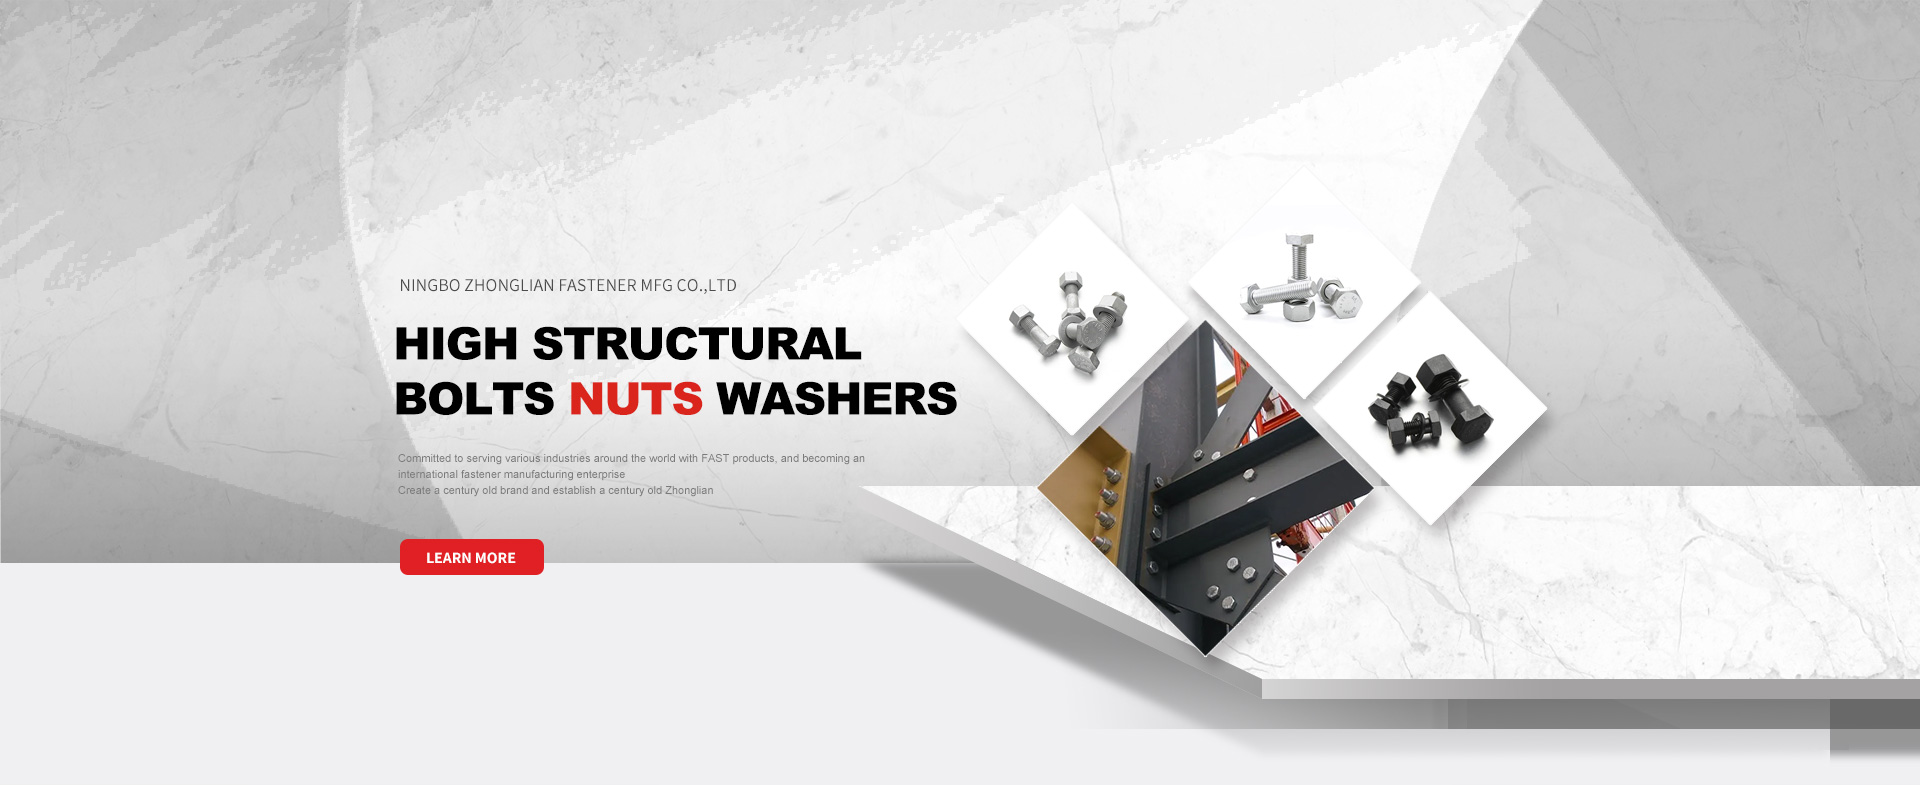 High Structural Bolts Nuts Washers